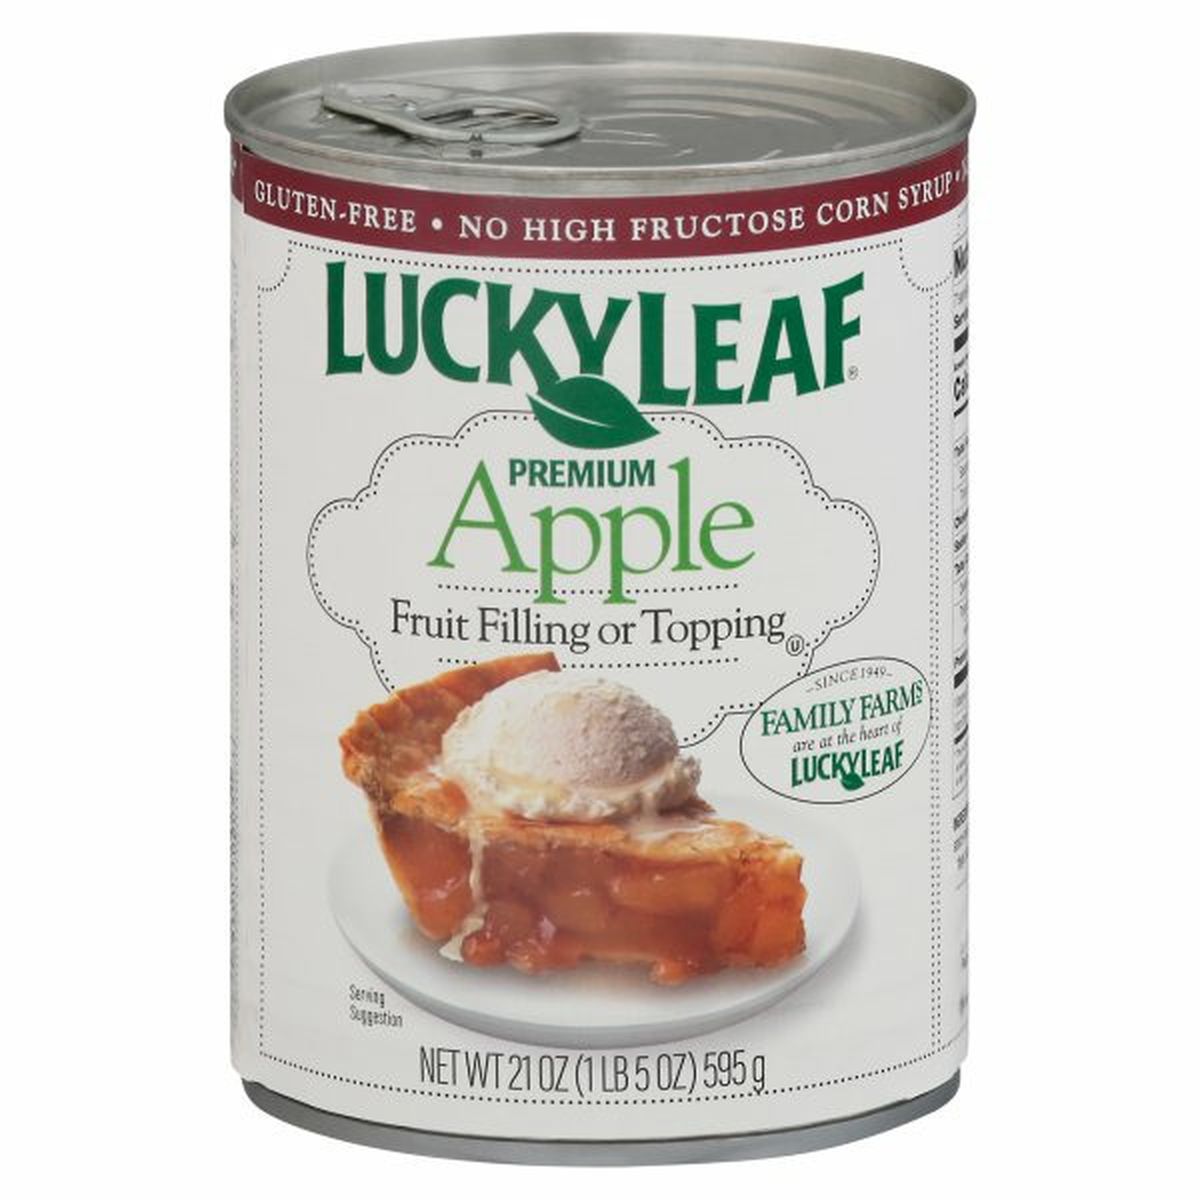 Calories in Lucky Leaf Fruit Filling or Topping, Premium, Apple